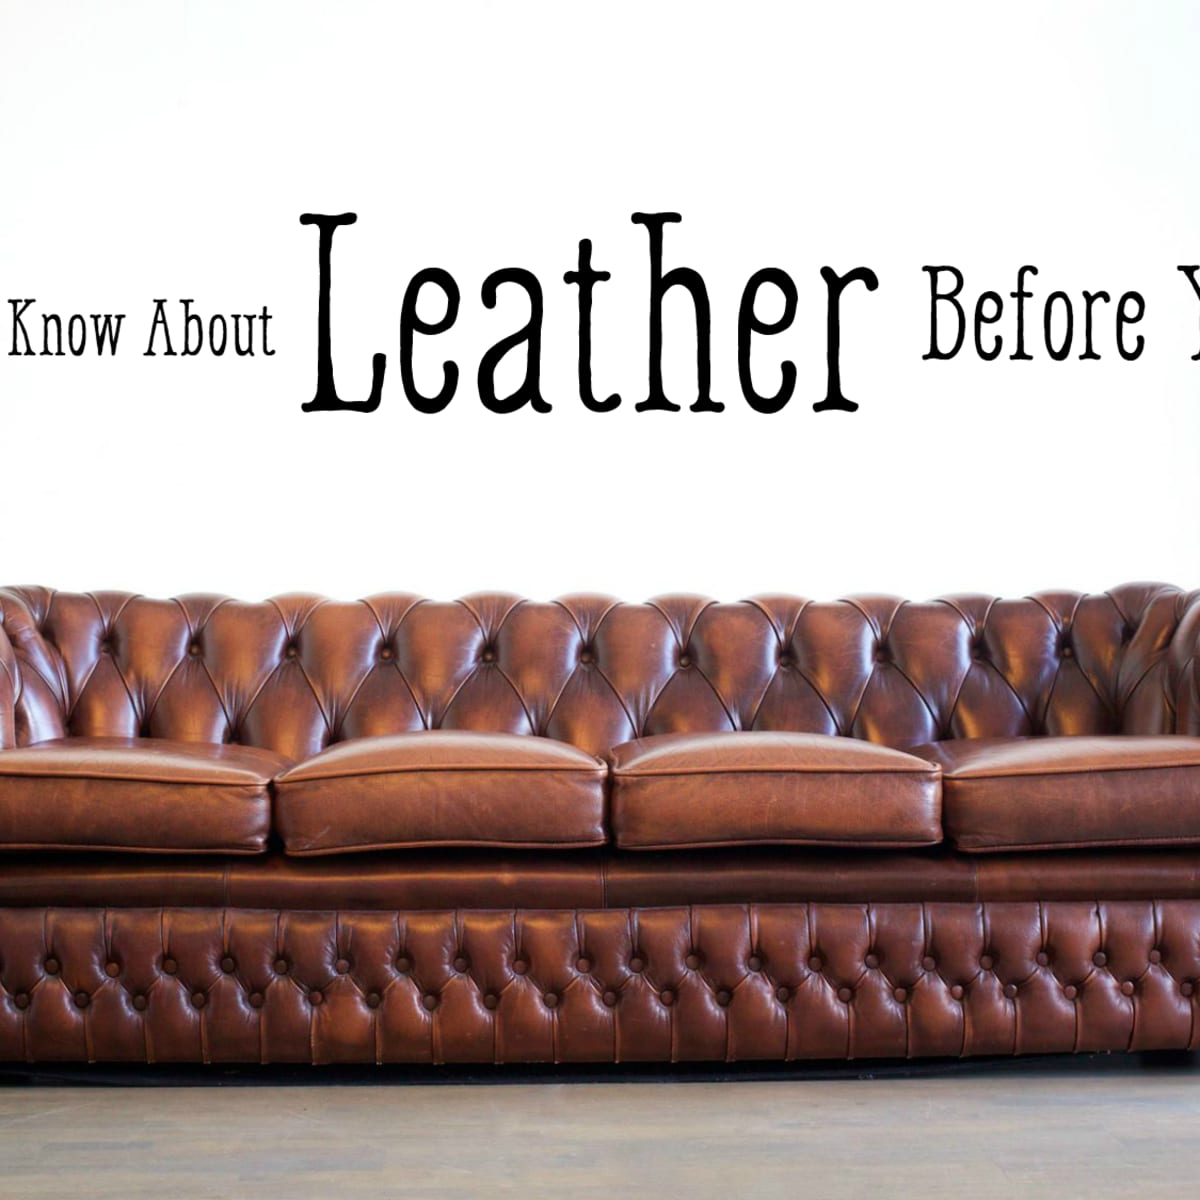 Leather Furniture Guide Top Grain To, What Does Top Grain Leather Mean In Furniture